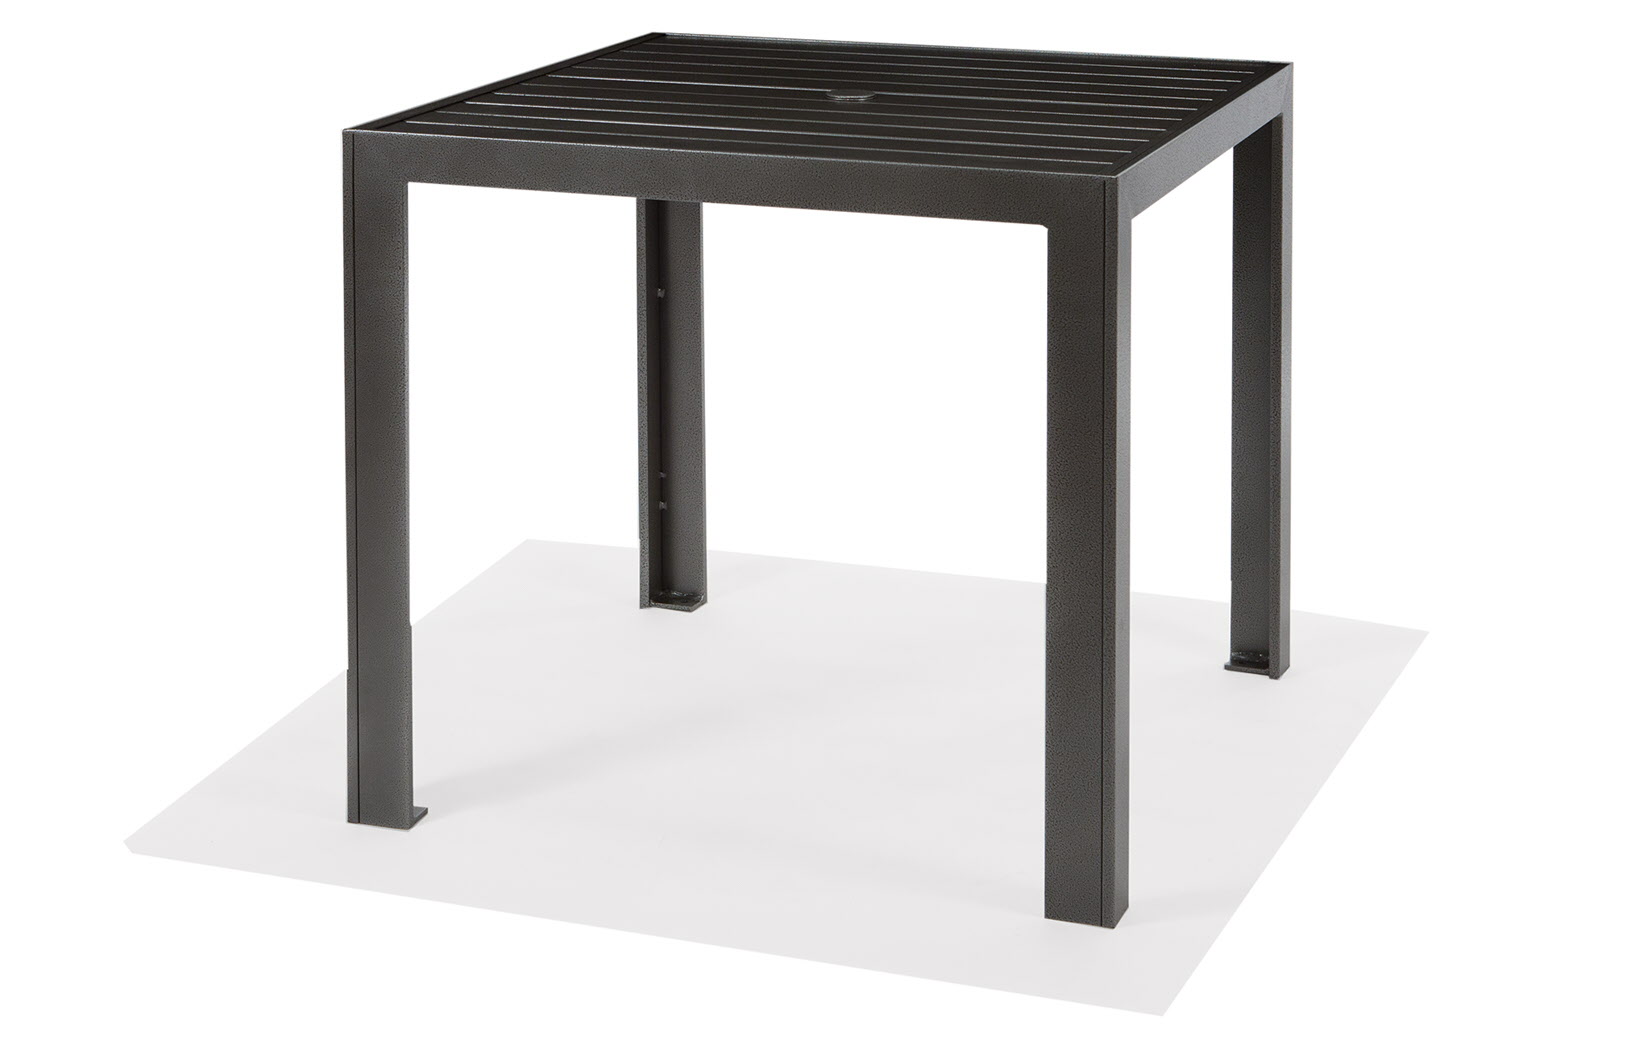 Meza Slat Collection 36 Inch Square Bar Height Table